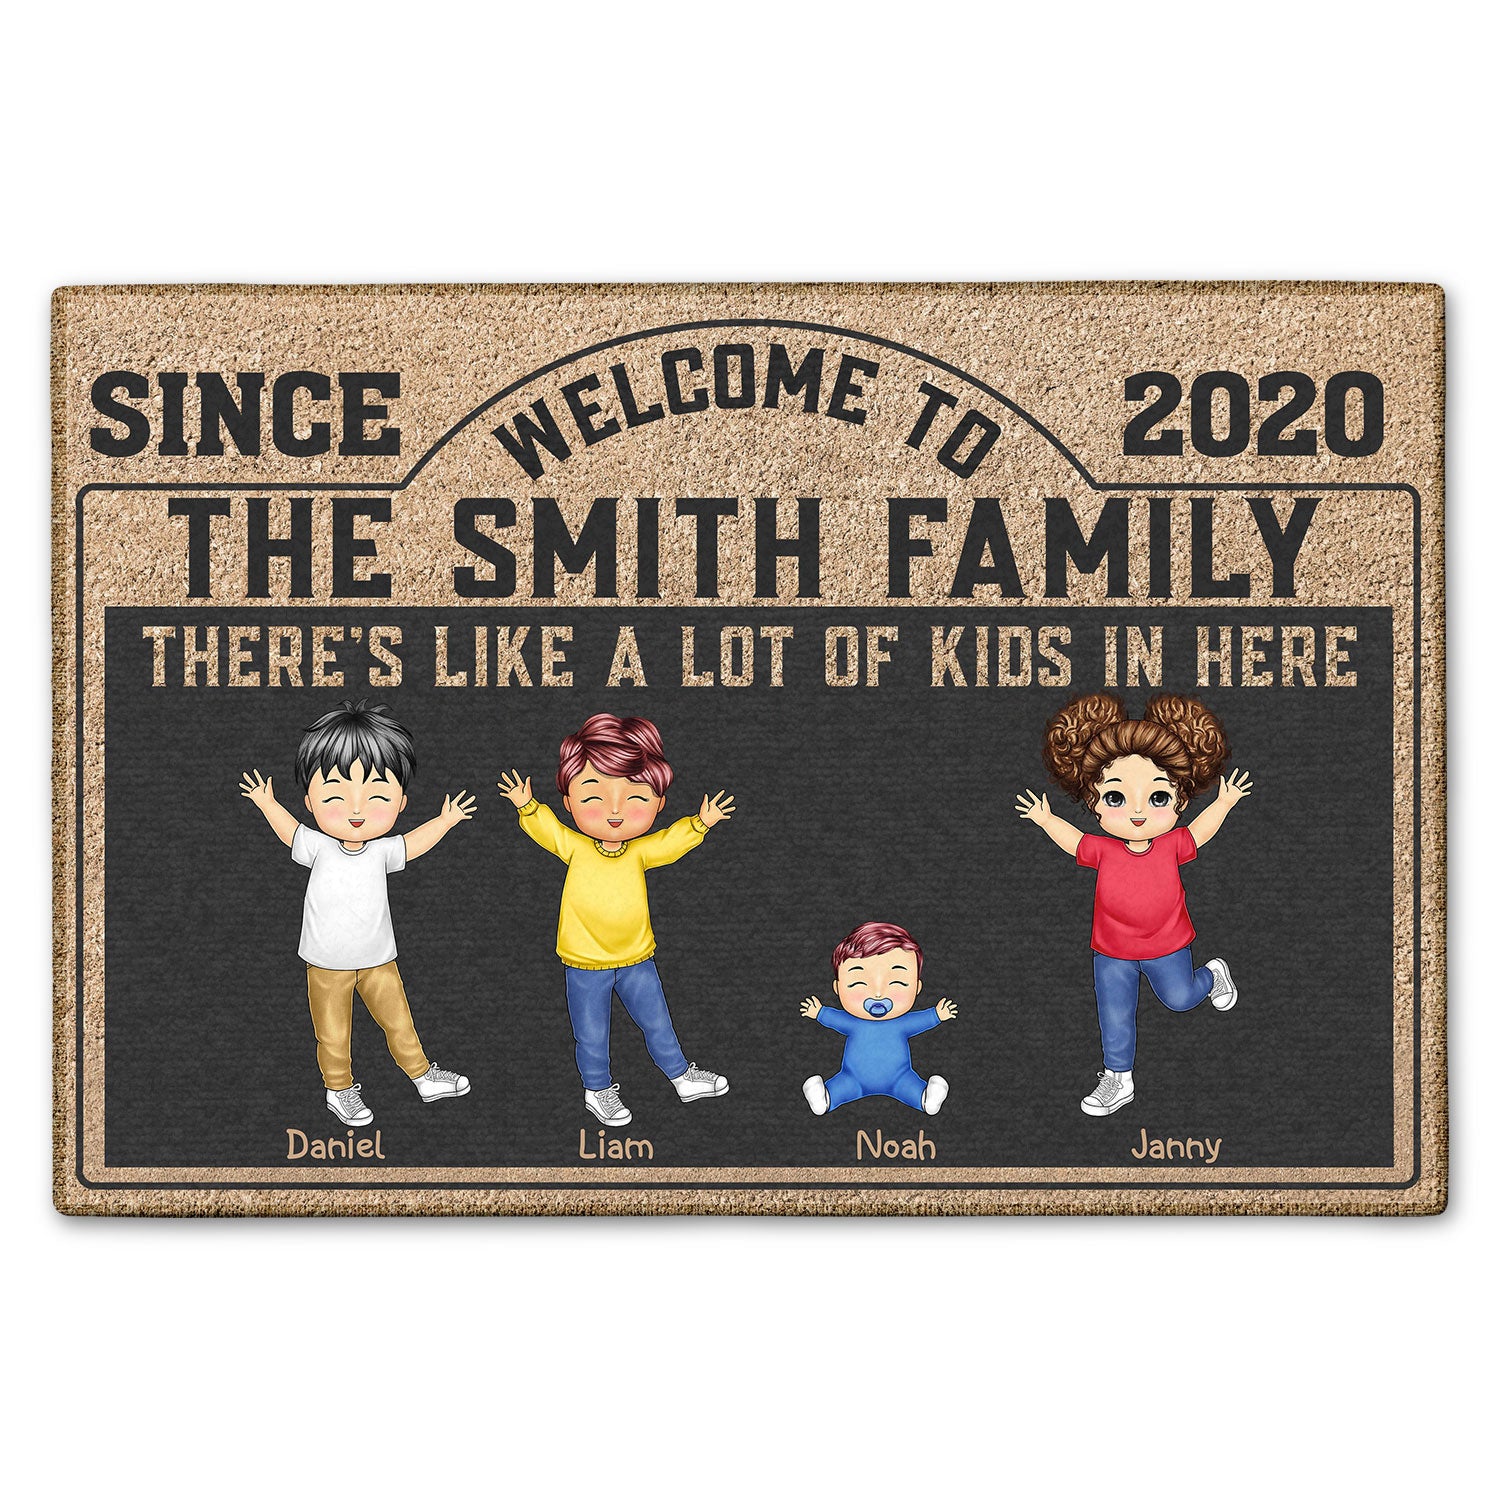 There's Like A Lot Of Kids In Here - Gift For Grandparents, Parents, Family - Personalized Doormat